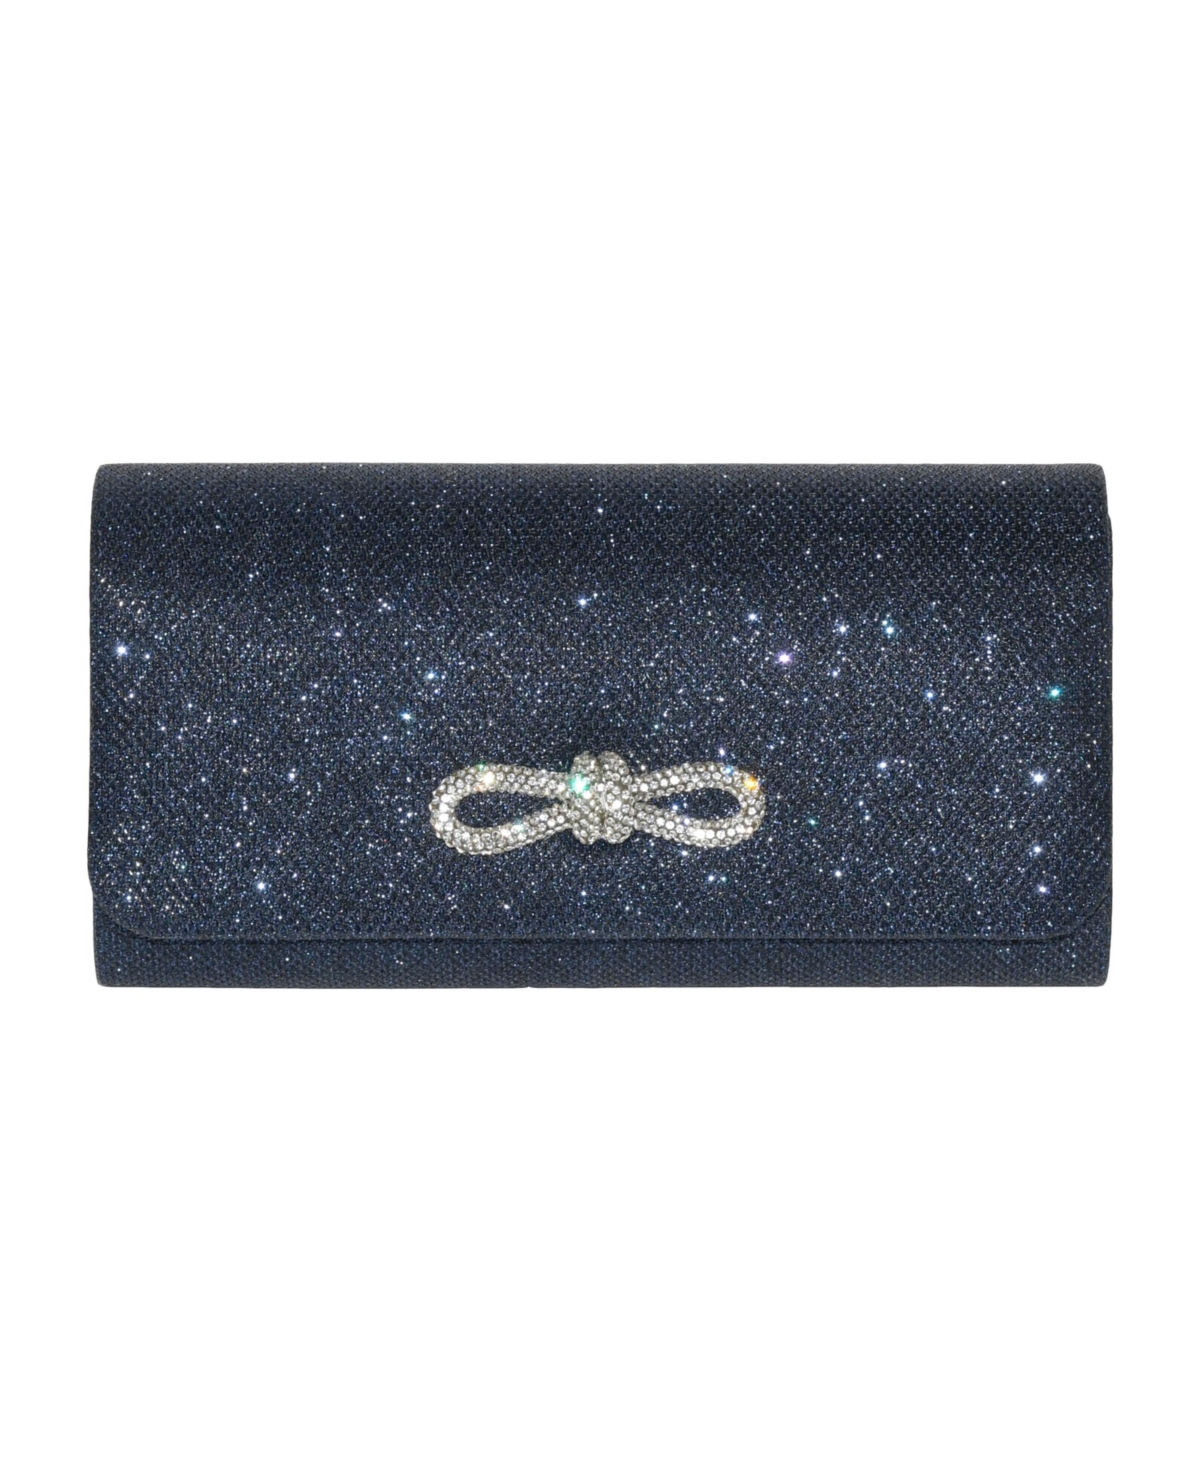 Ladies' Evening Bag with Glitter Bow - Navy